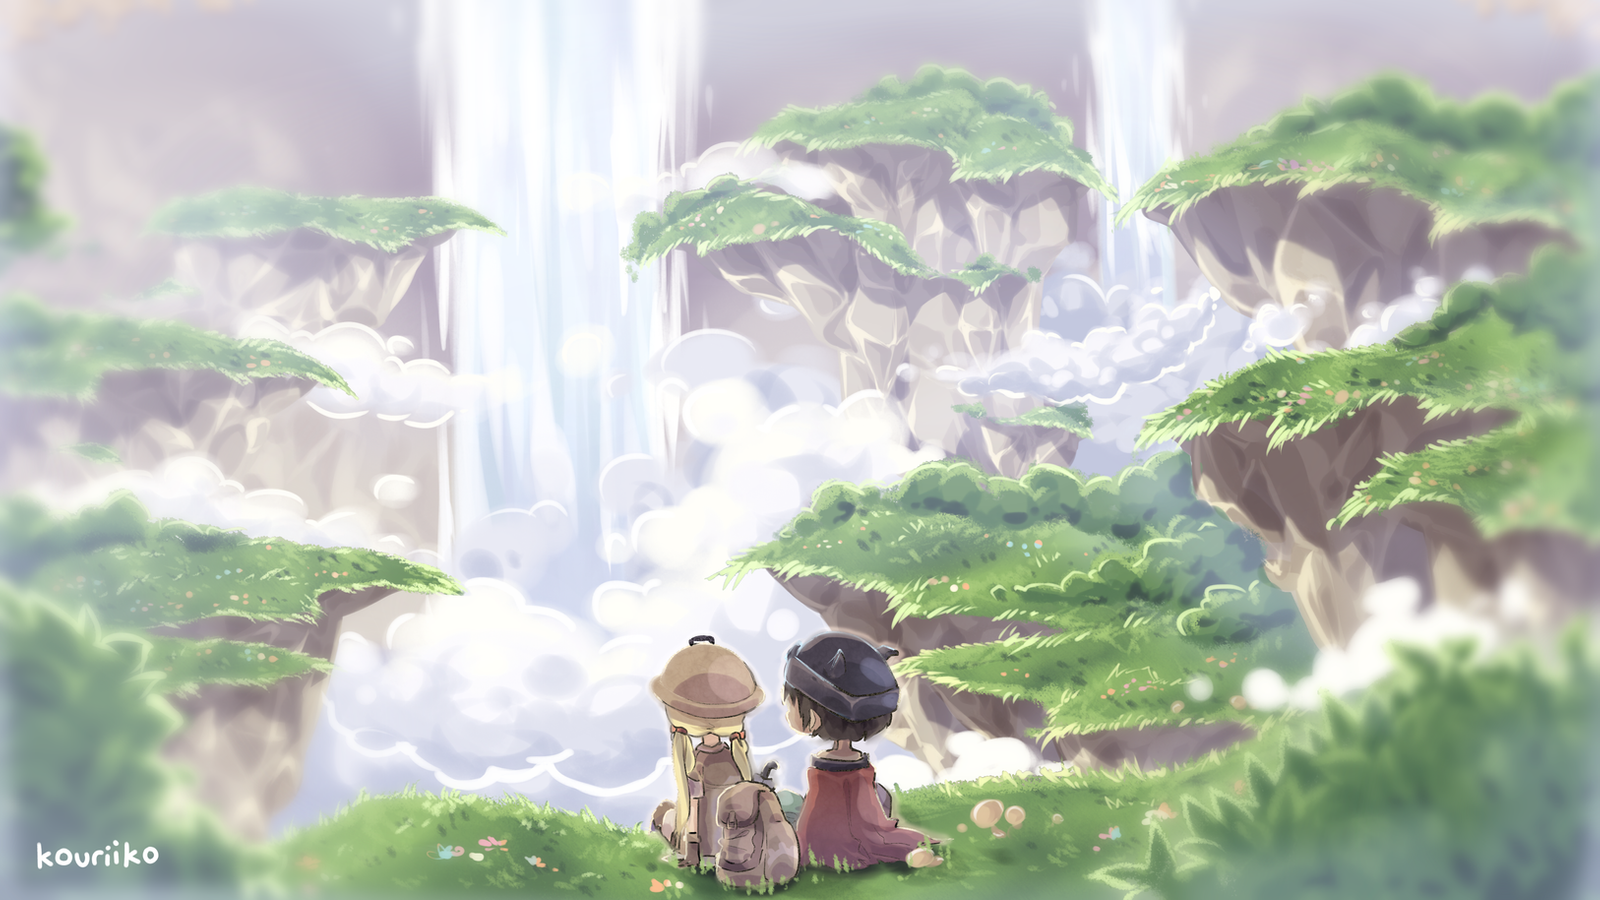 Made in Abyss 1 слой. Made in Abyss арт. Made in Abyss Рико и рег. Made in Abyss бездна.